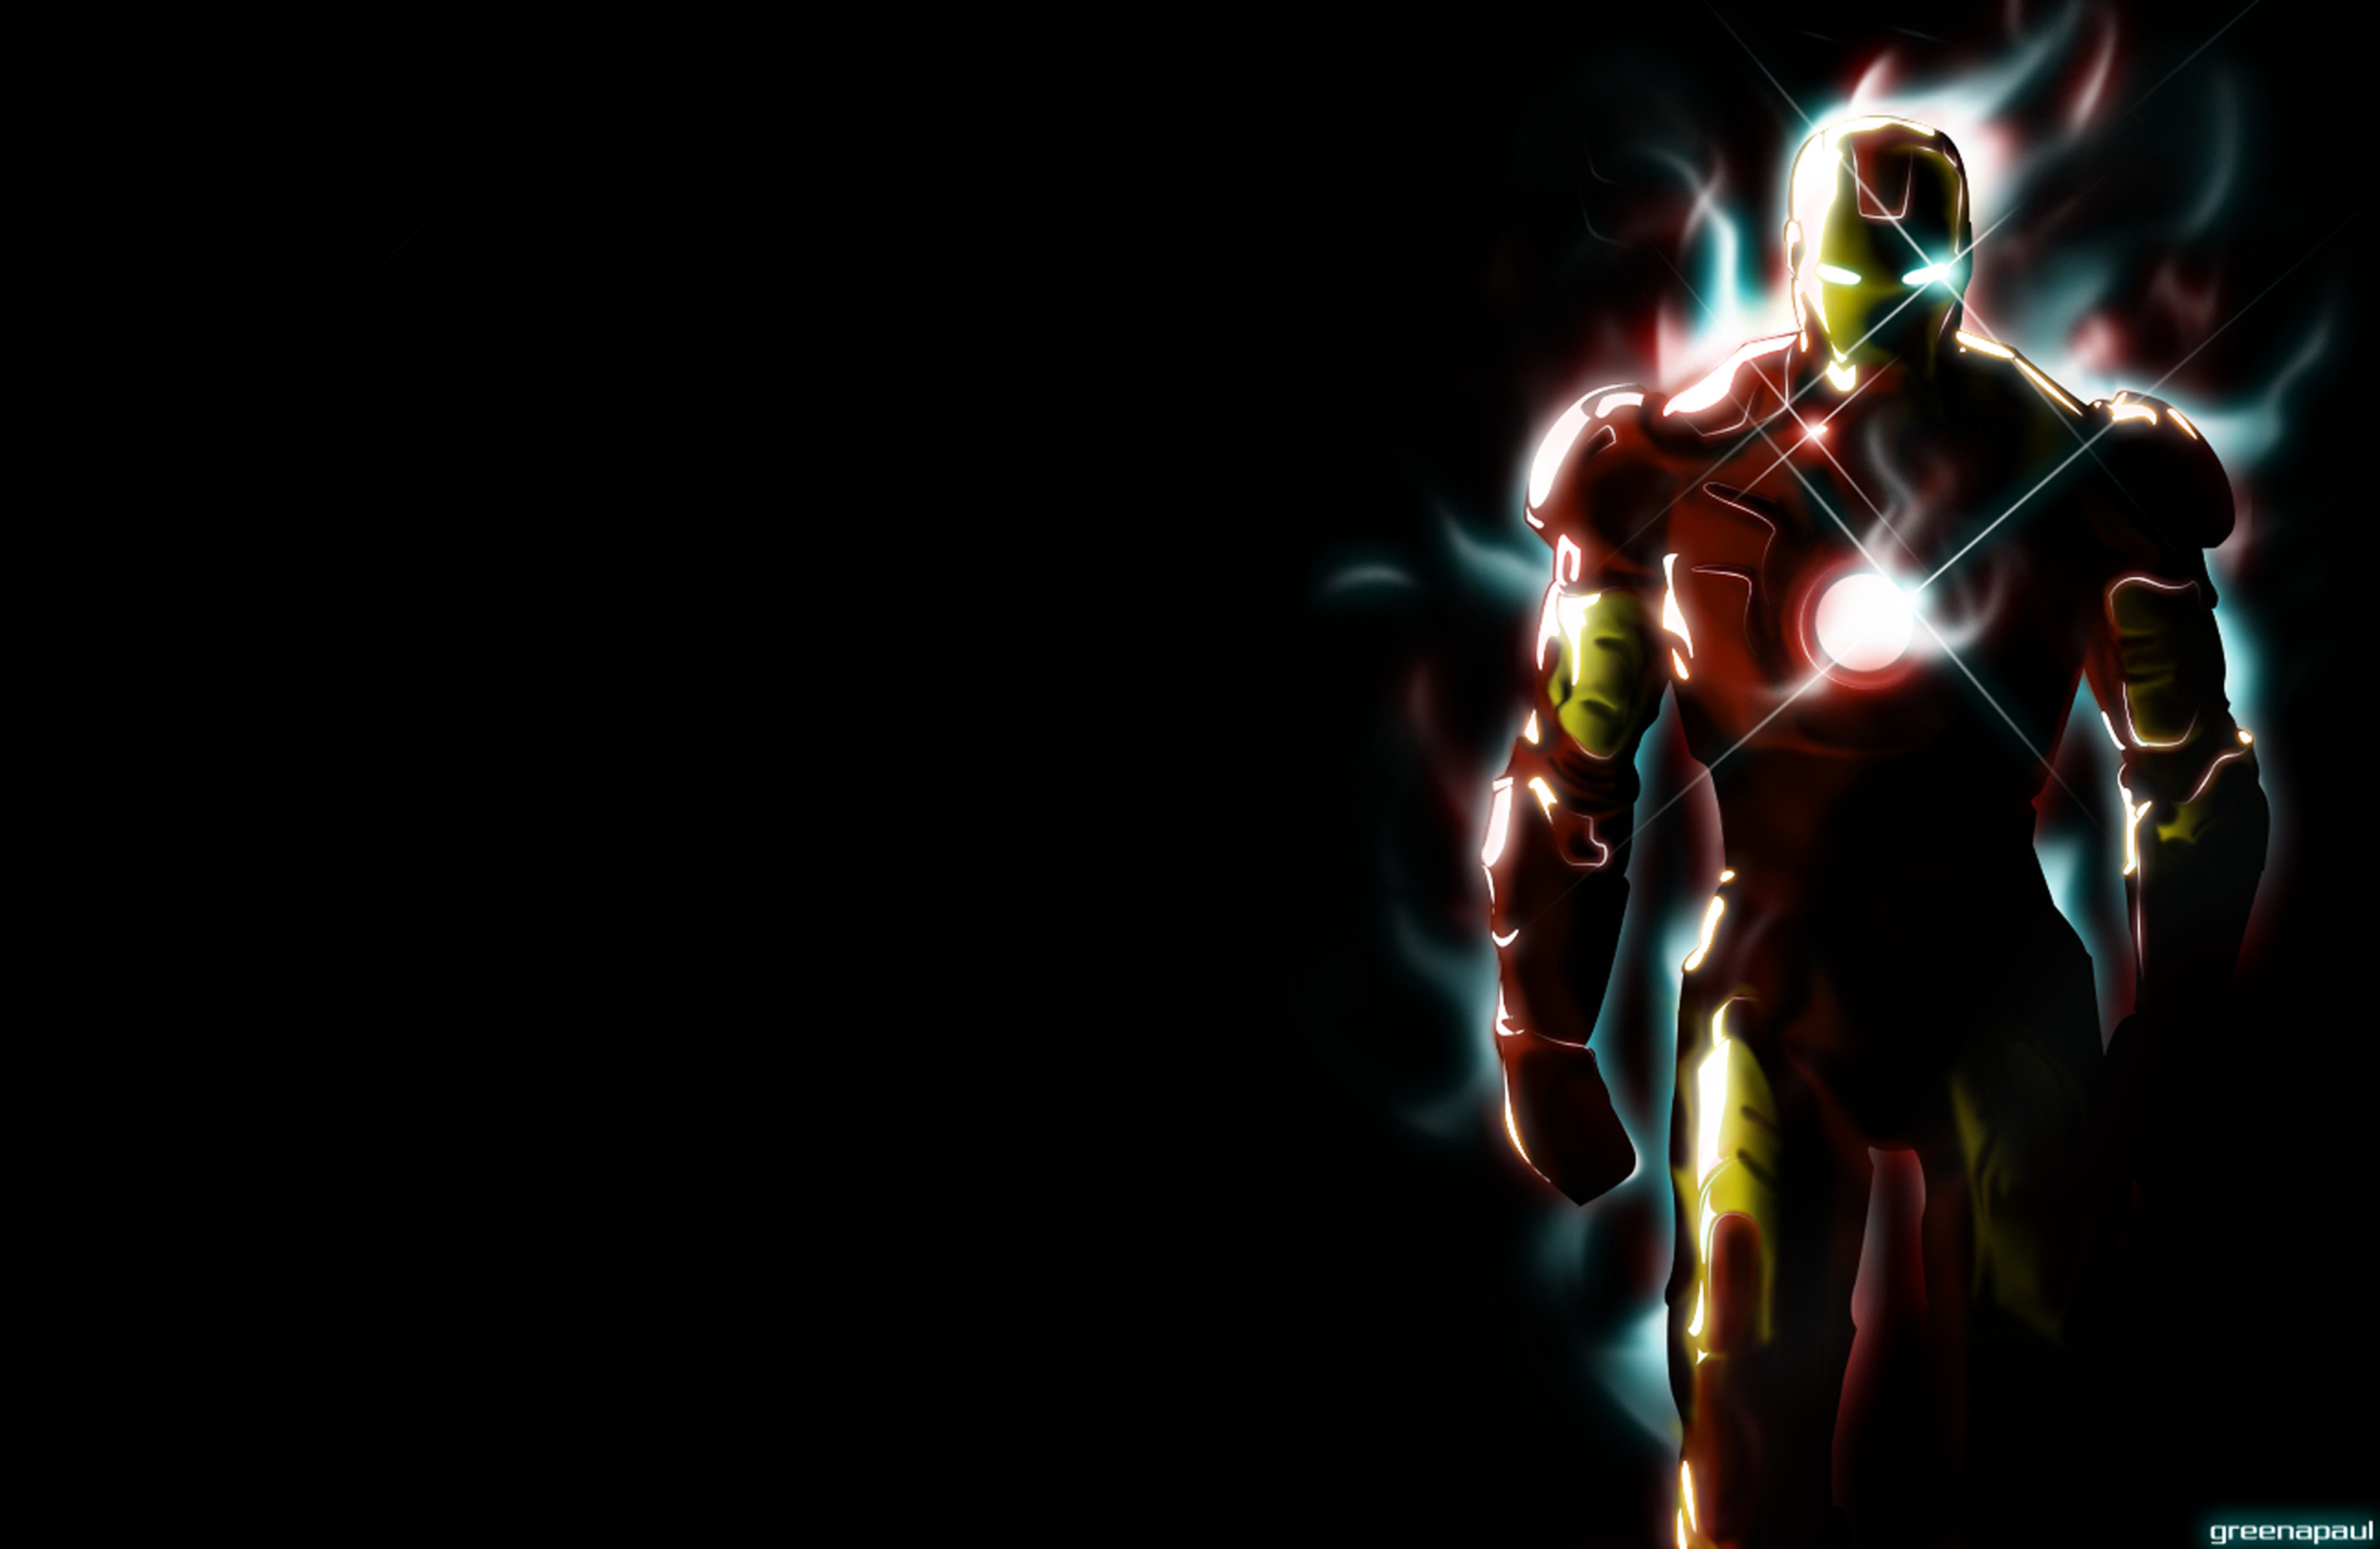 Free download Cool Iron Man Wallpaper Image Picture Becuo [3000x1953] for your Desktop, Mobile & Tablet. Explore Cool Iron Man Wallpaper. HD Iron Man Wallpaper, Epic Iron Man Wallpaper